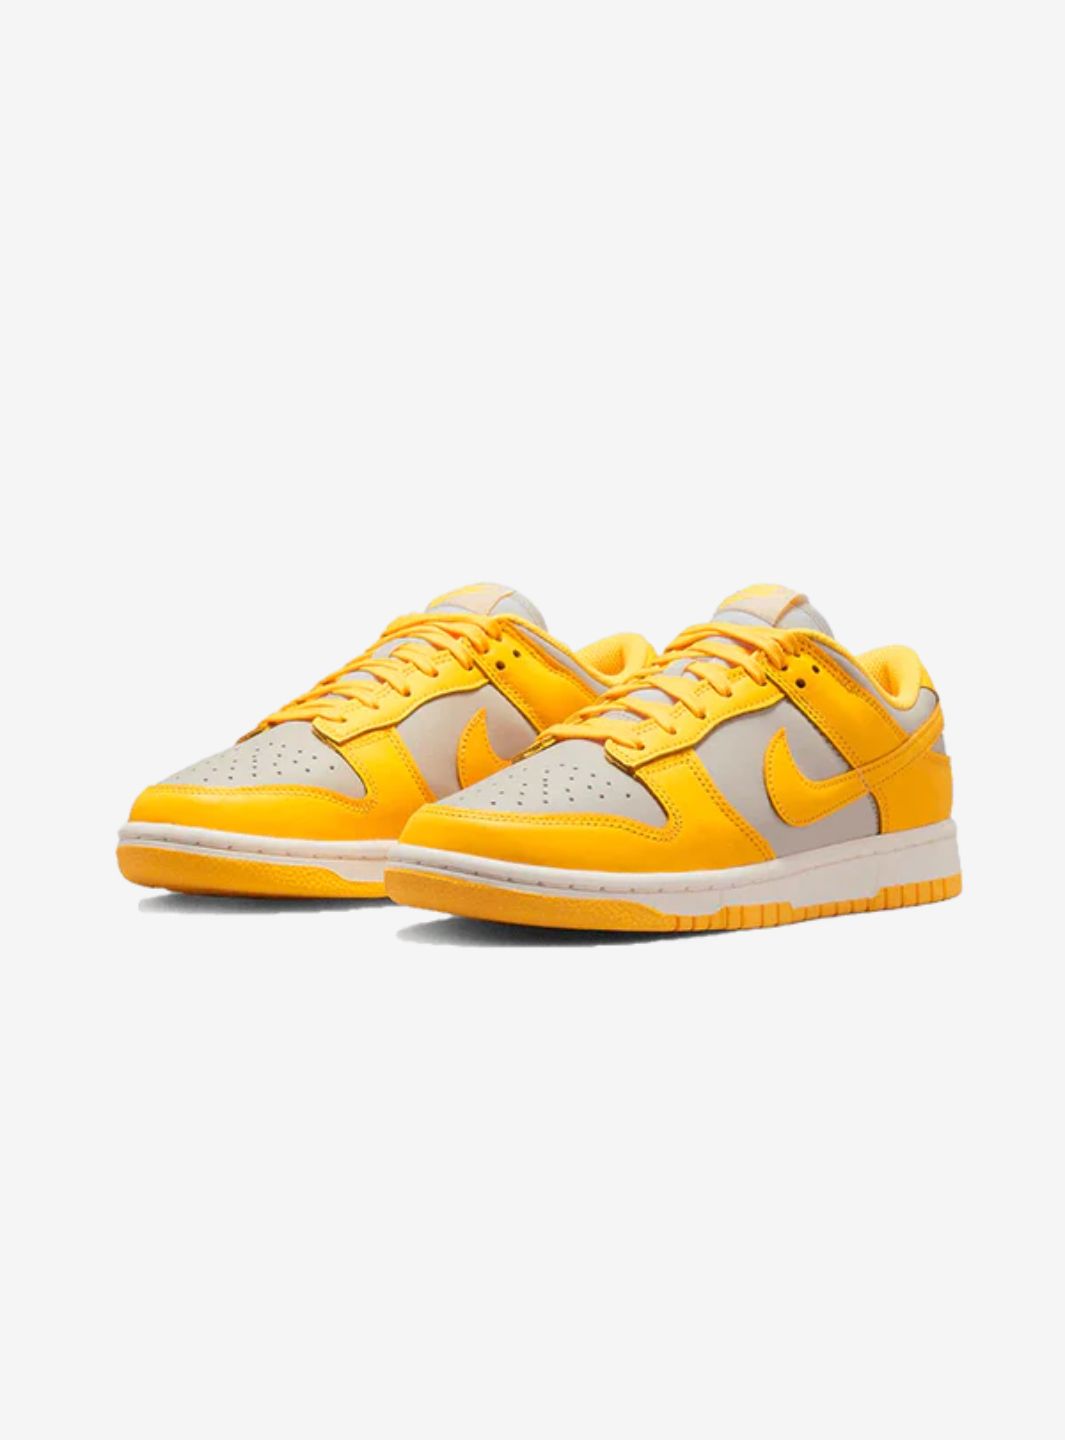 Nike Dunk Low Citron Pulse - DD1503-002 | ResellZone